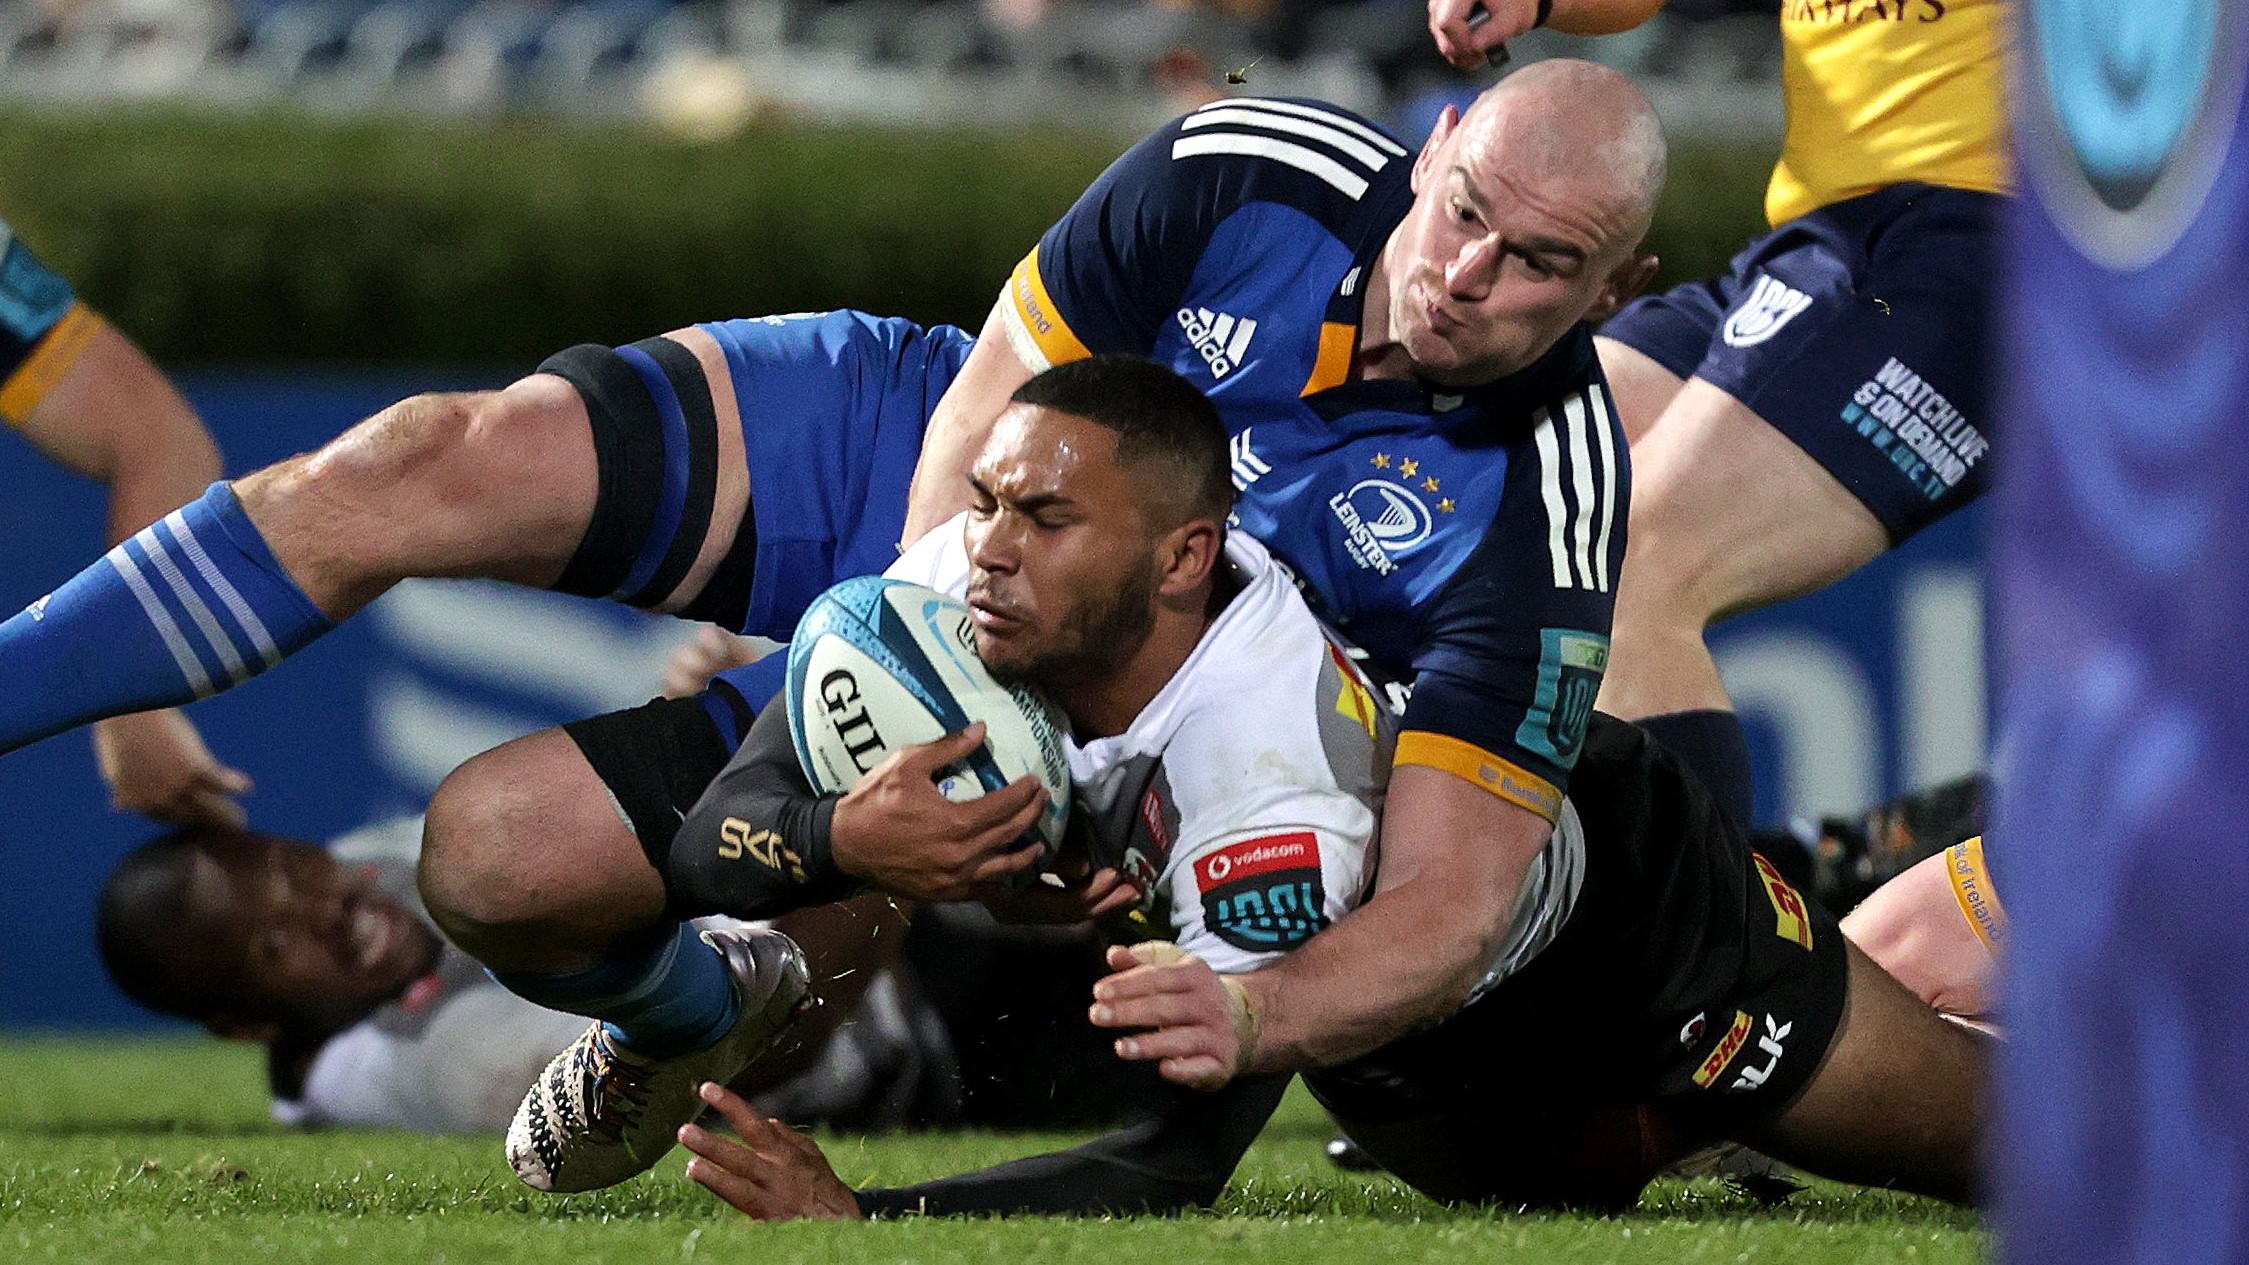 Mandatory Credit: Photo by Laszlo Geczo/INPHO/Shutterstock/BackpagePix (13844600ag) Leinster vs DHL Stormers. DHL Stormers' Suleiman Hartzenberg is tackled by Rhys Ruddock of Leinster BKT United Rugby Championship, RDS, Dublin - 24 Mar 2023